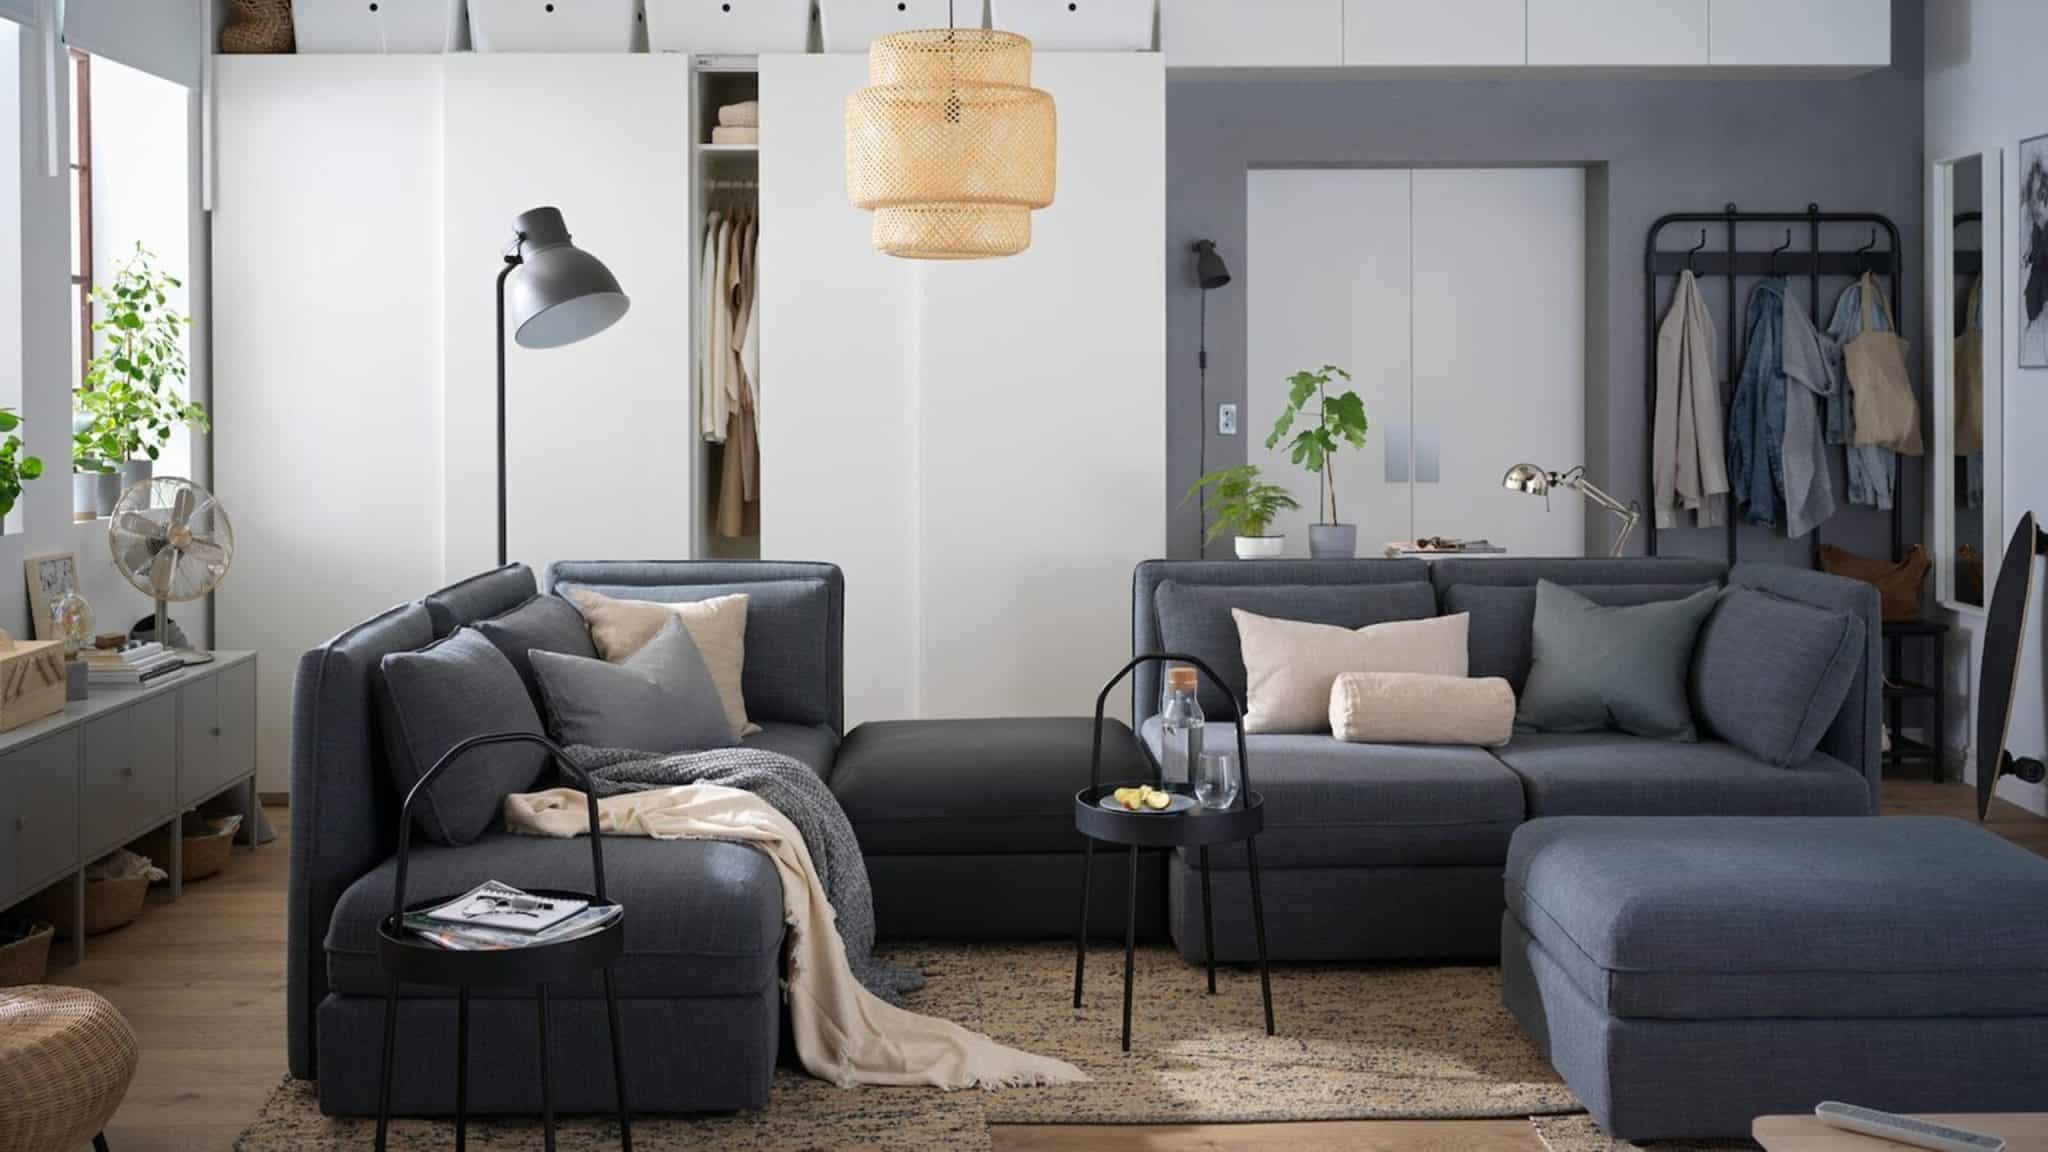 Light Gray Sofas: A Stylish Look for All Budgets